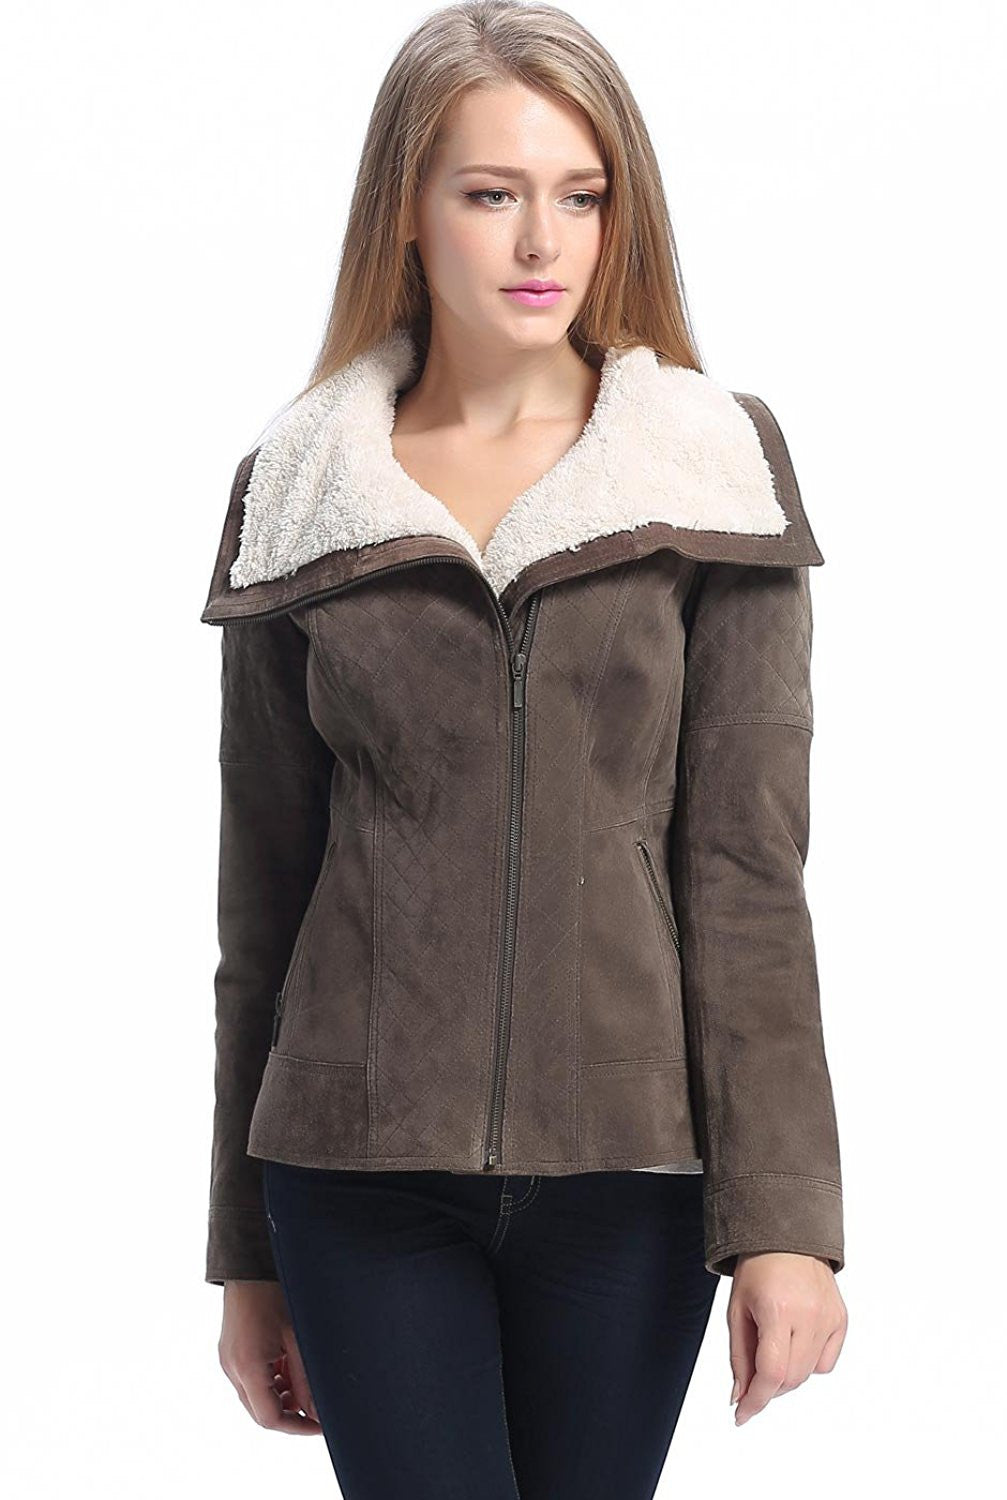 BGSD Women Liza Quilted Sherpa Suede Leather Jacket